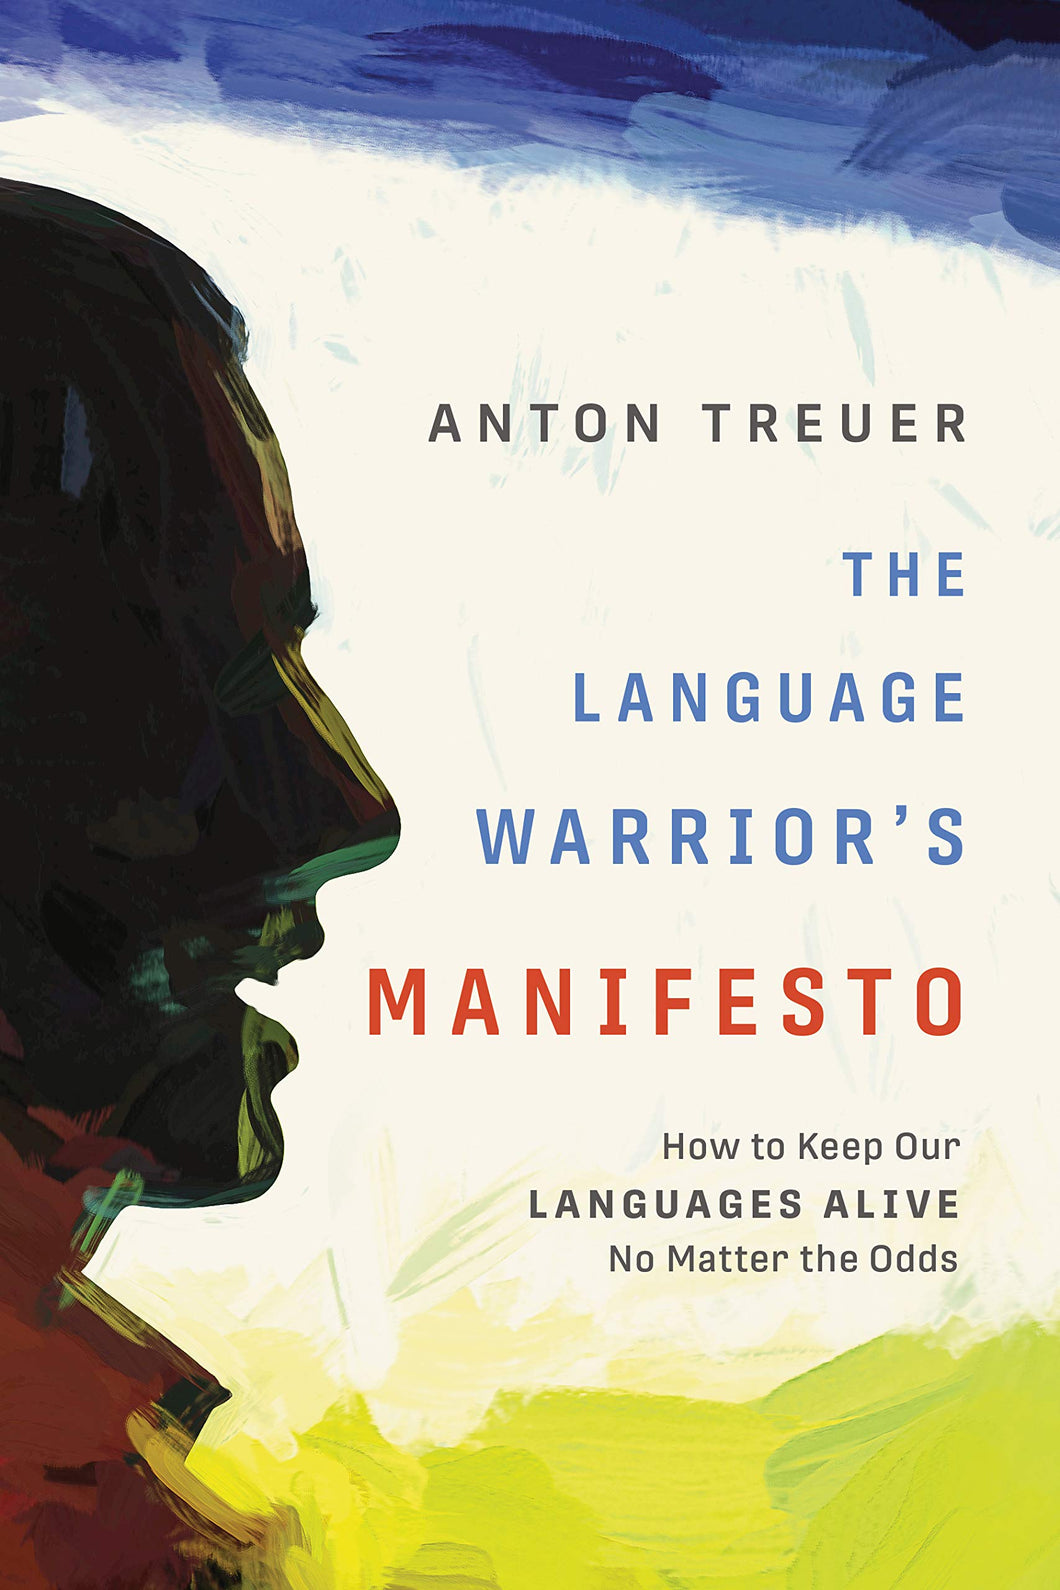 The Language Warrior's Manifesto: How To Keep Our Languages Alive No Matter The Odds [Anton Treuer]